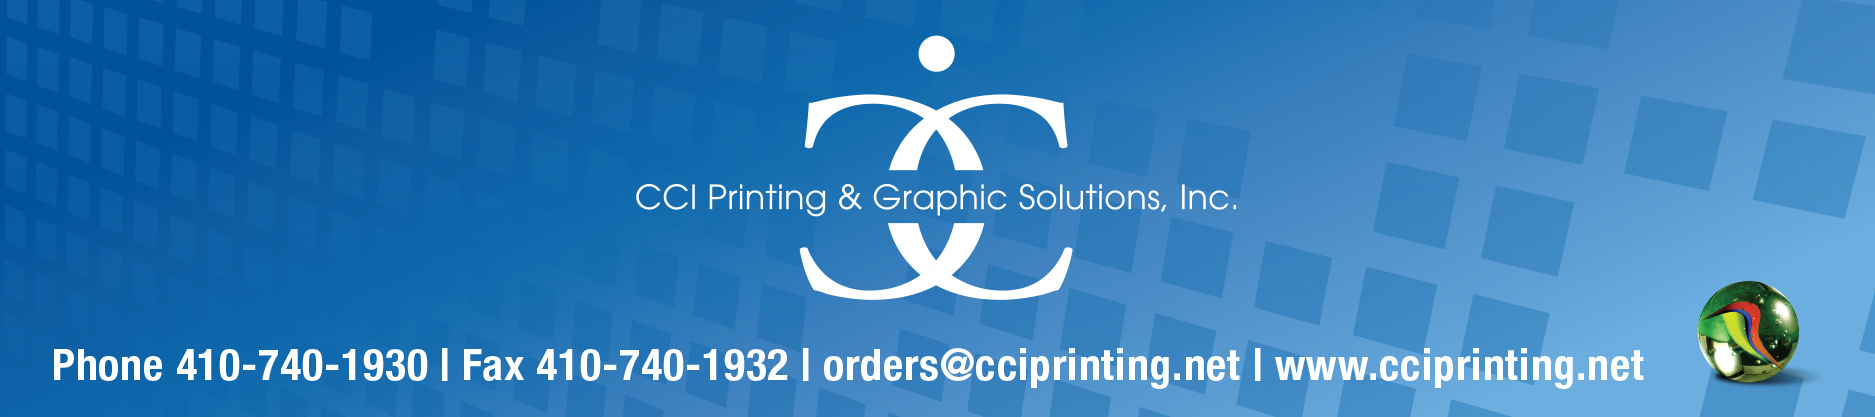 CCI Printing & Graphic Solutions's Logo